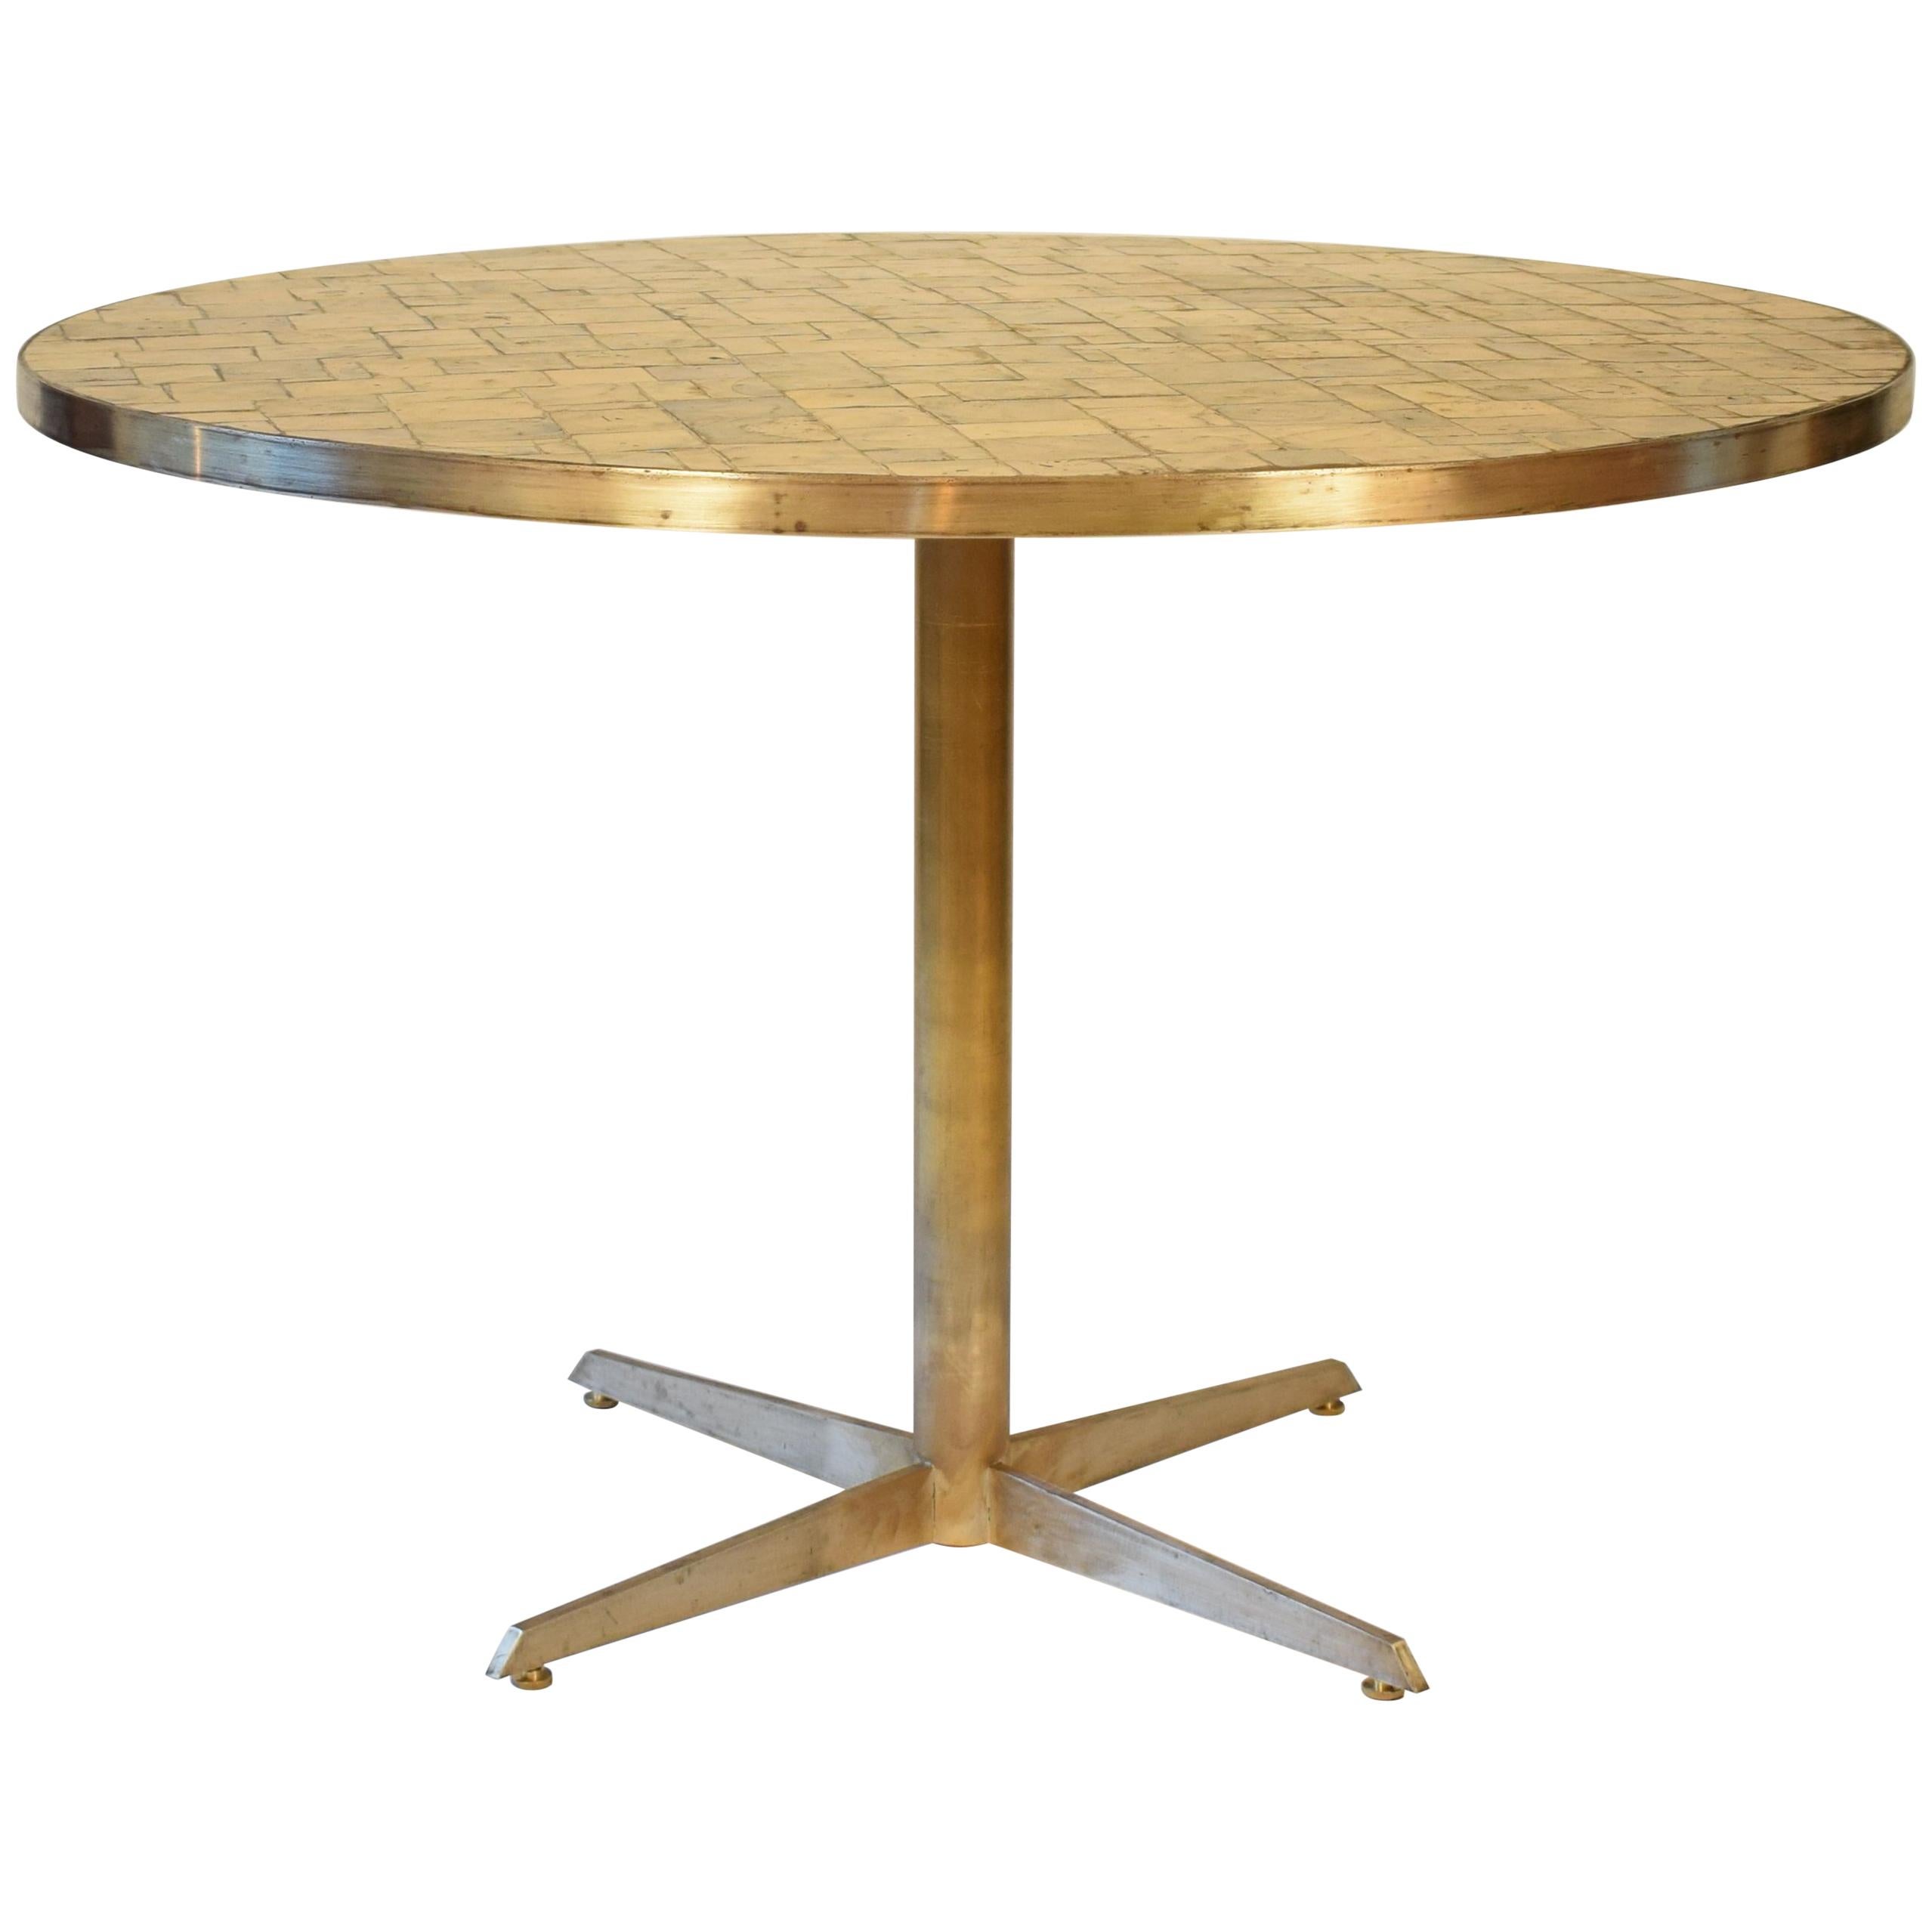 Midcentury Round Dining Table with Gilded Glass Tiles Top and Brass Base